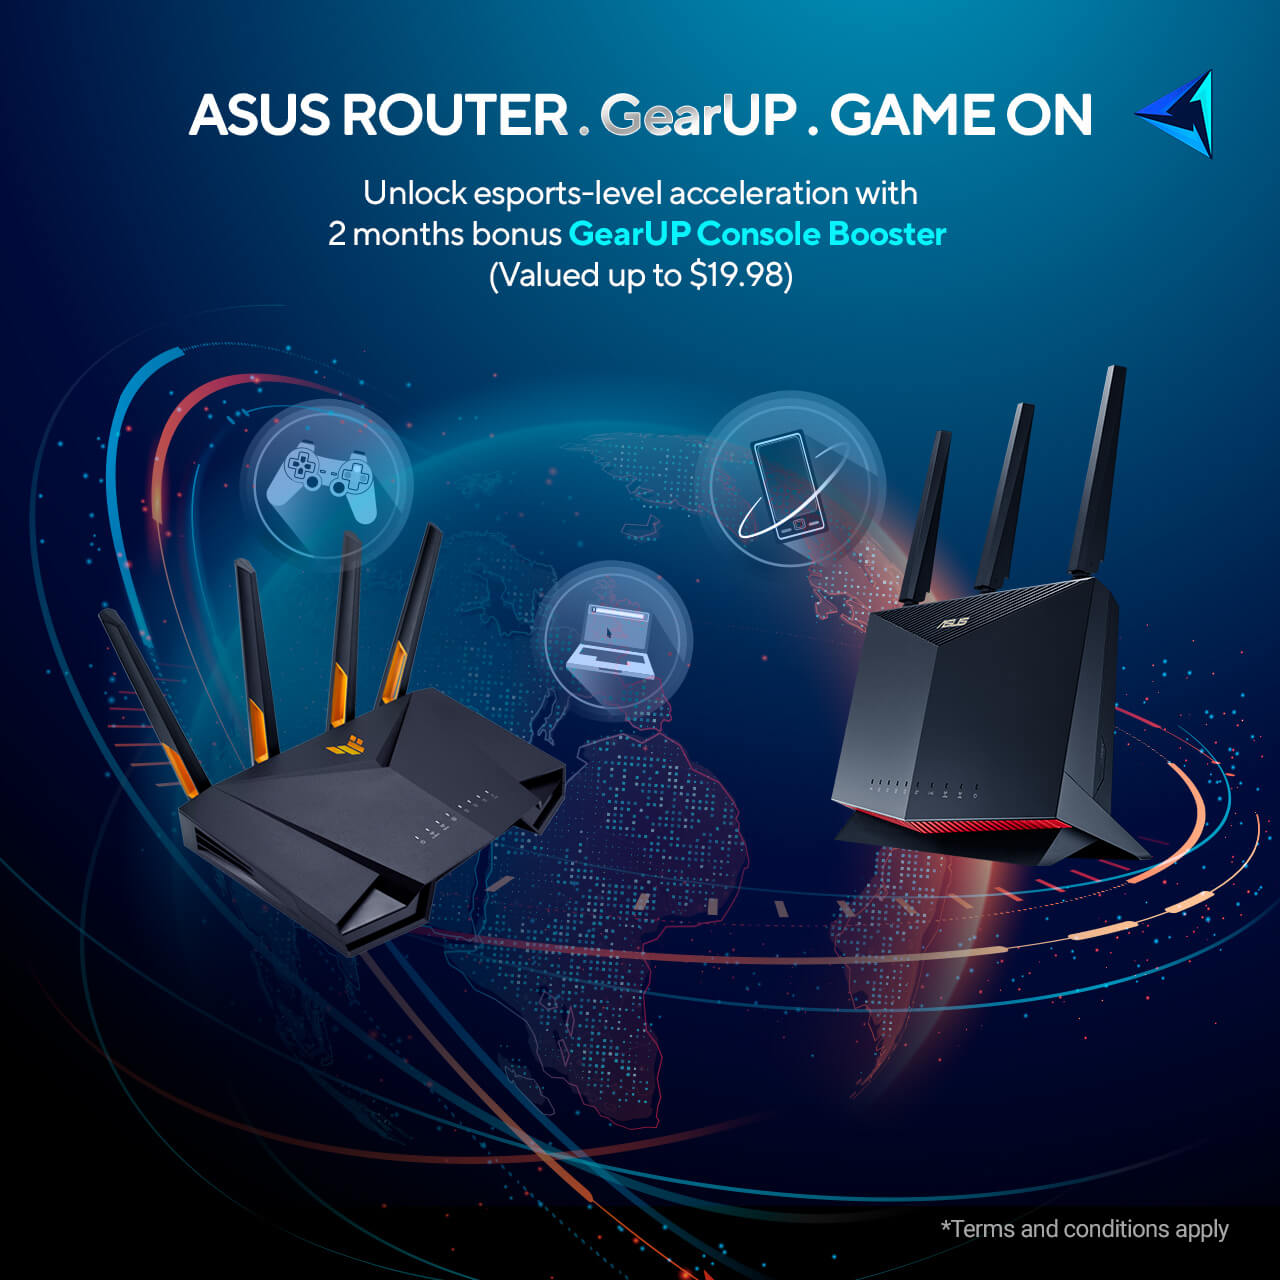 ASUS Routers, Gear Up. Game On! eSports Boost with Free Console Booster